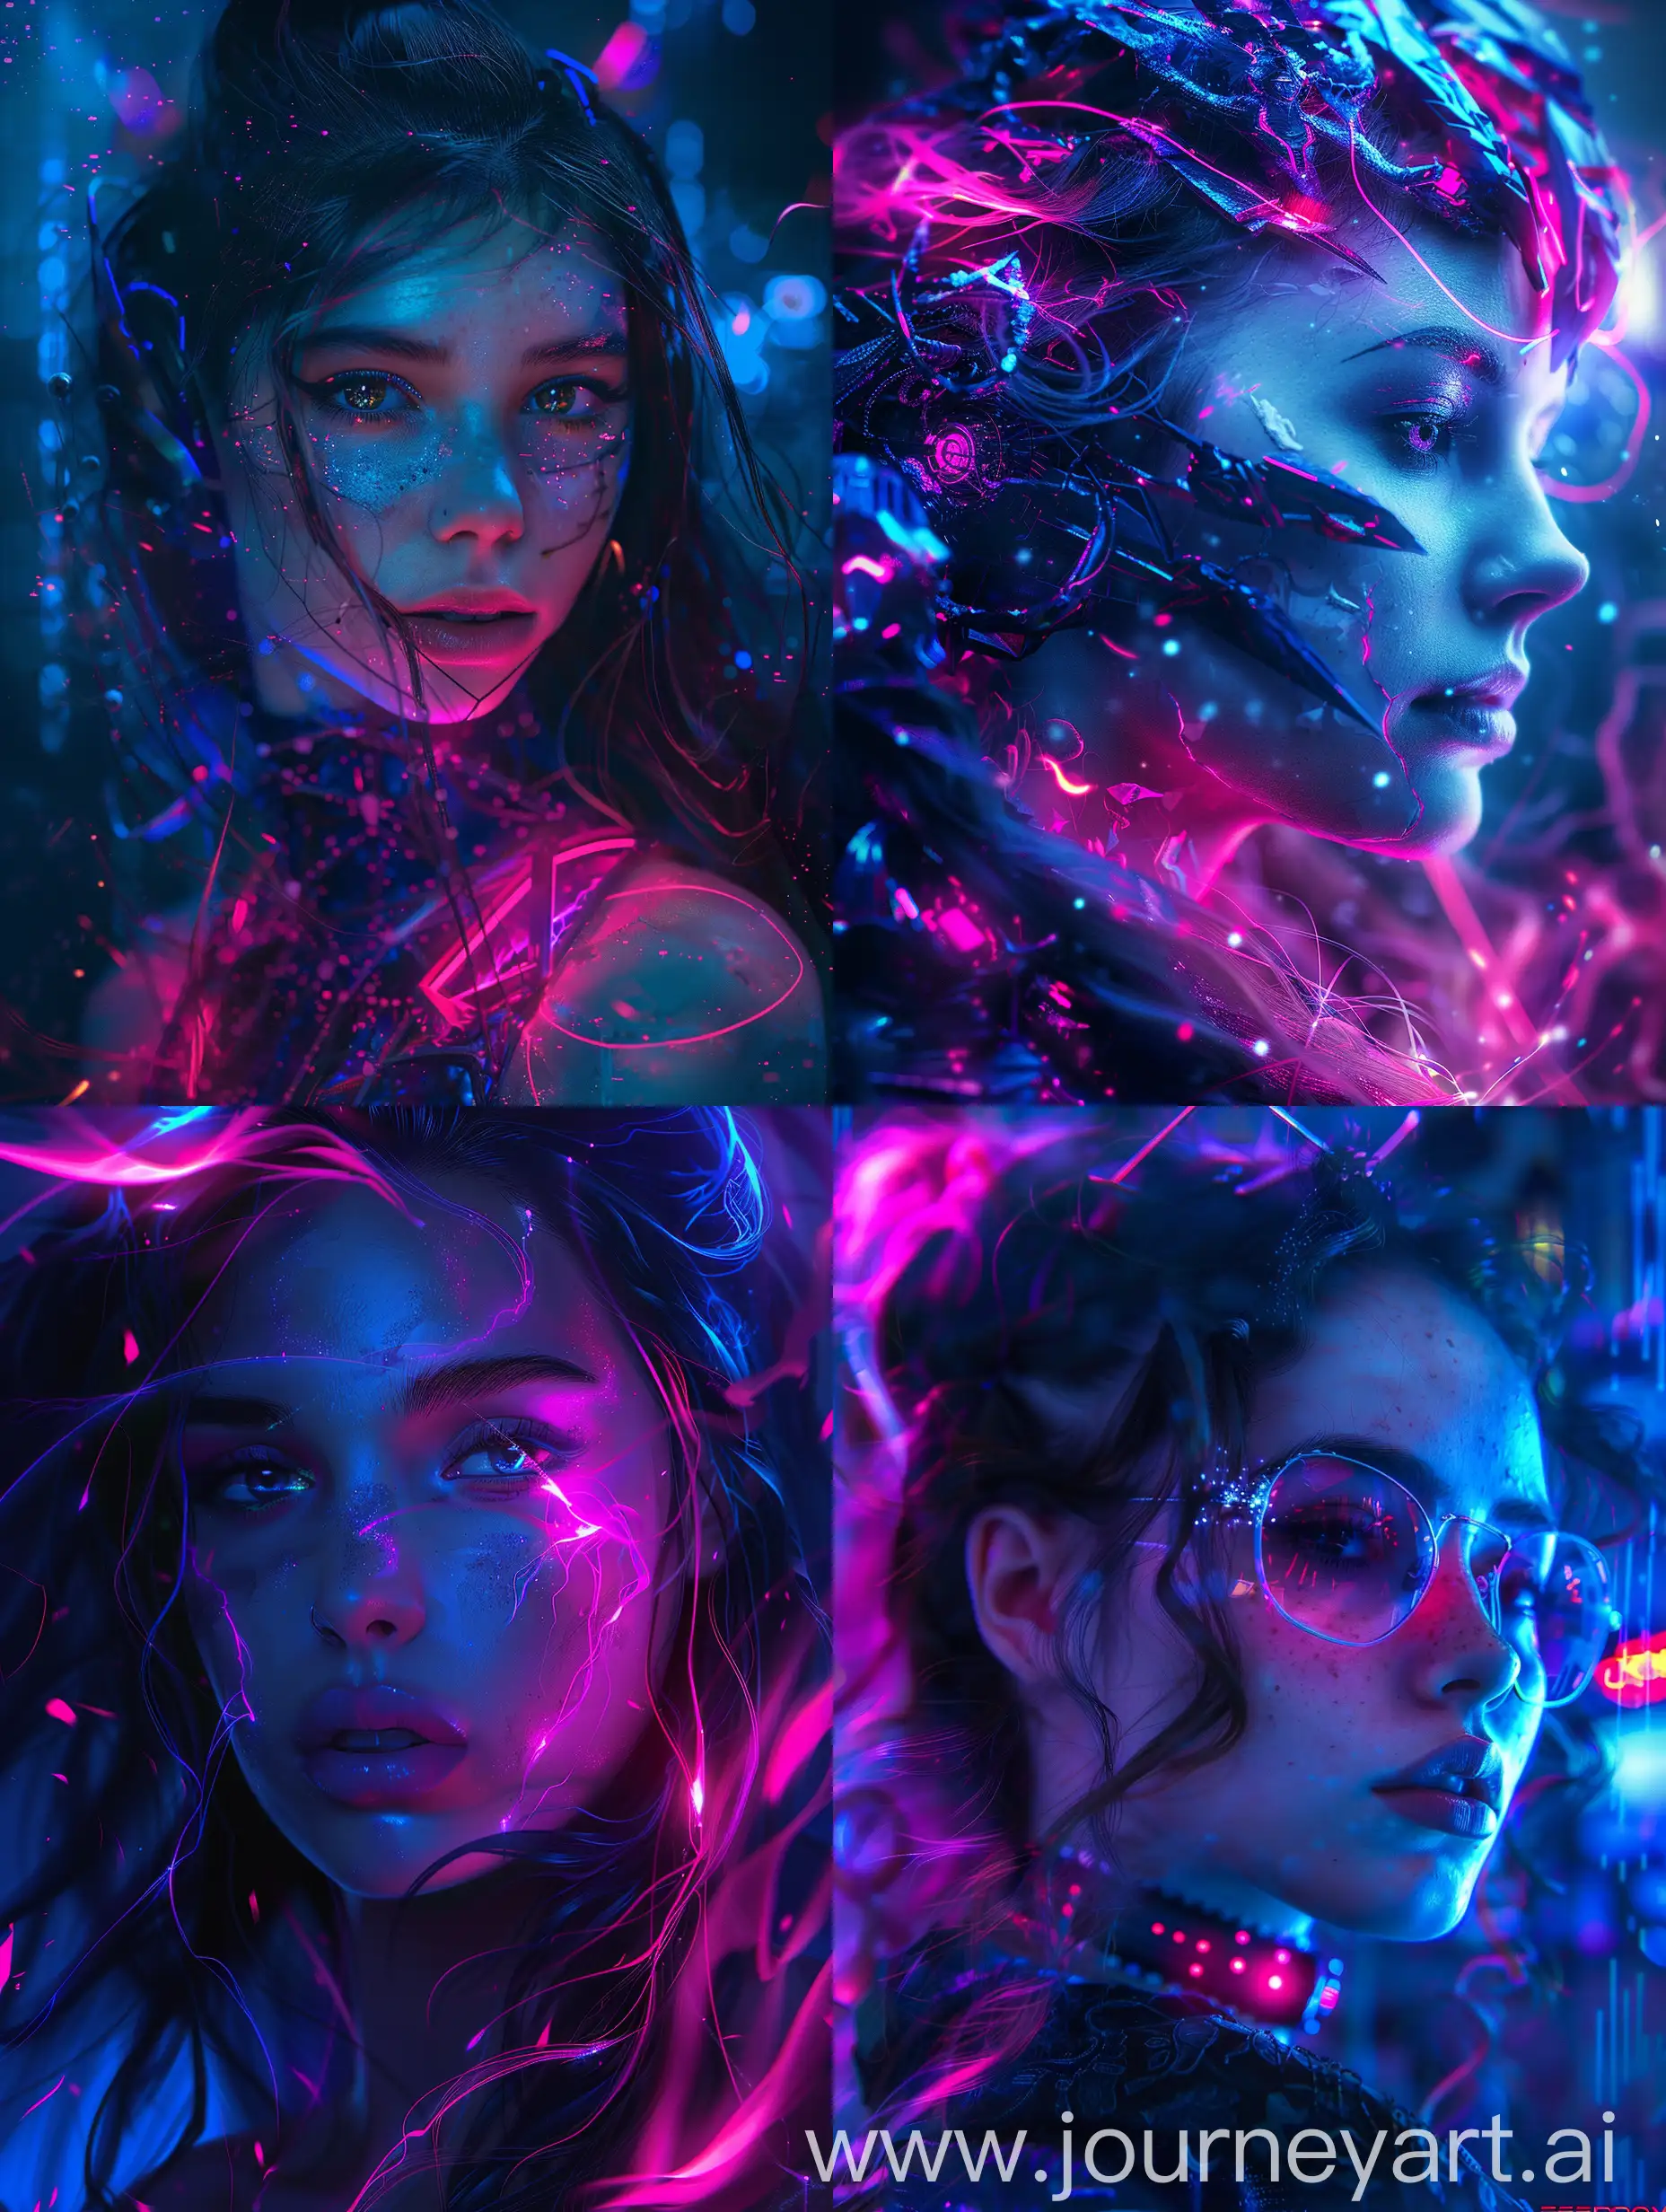 Princess, darkness, potrait,  with subtle pink and blue gradients, realistic, 1girl, beautiful, high detail, attractive, fit, pretty face, cyberpunk fantasy, futuristic fairy psychedelic tale, robotic lasers fairy dancing rave in an neon incandescent flame, moonlight enveloping attire tech-punk mech-punk cityscape